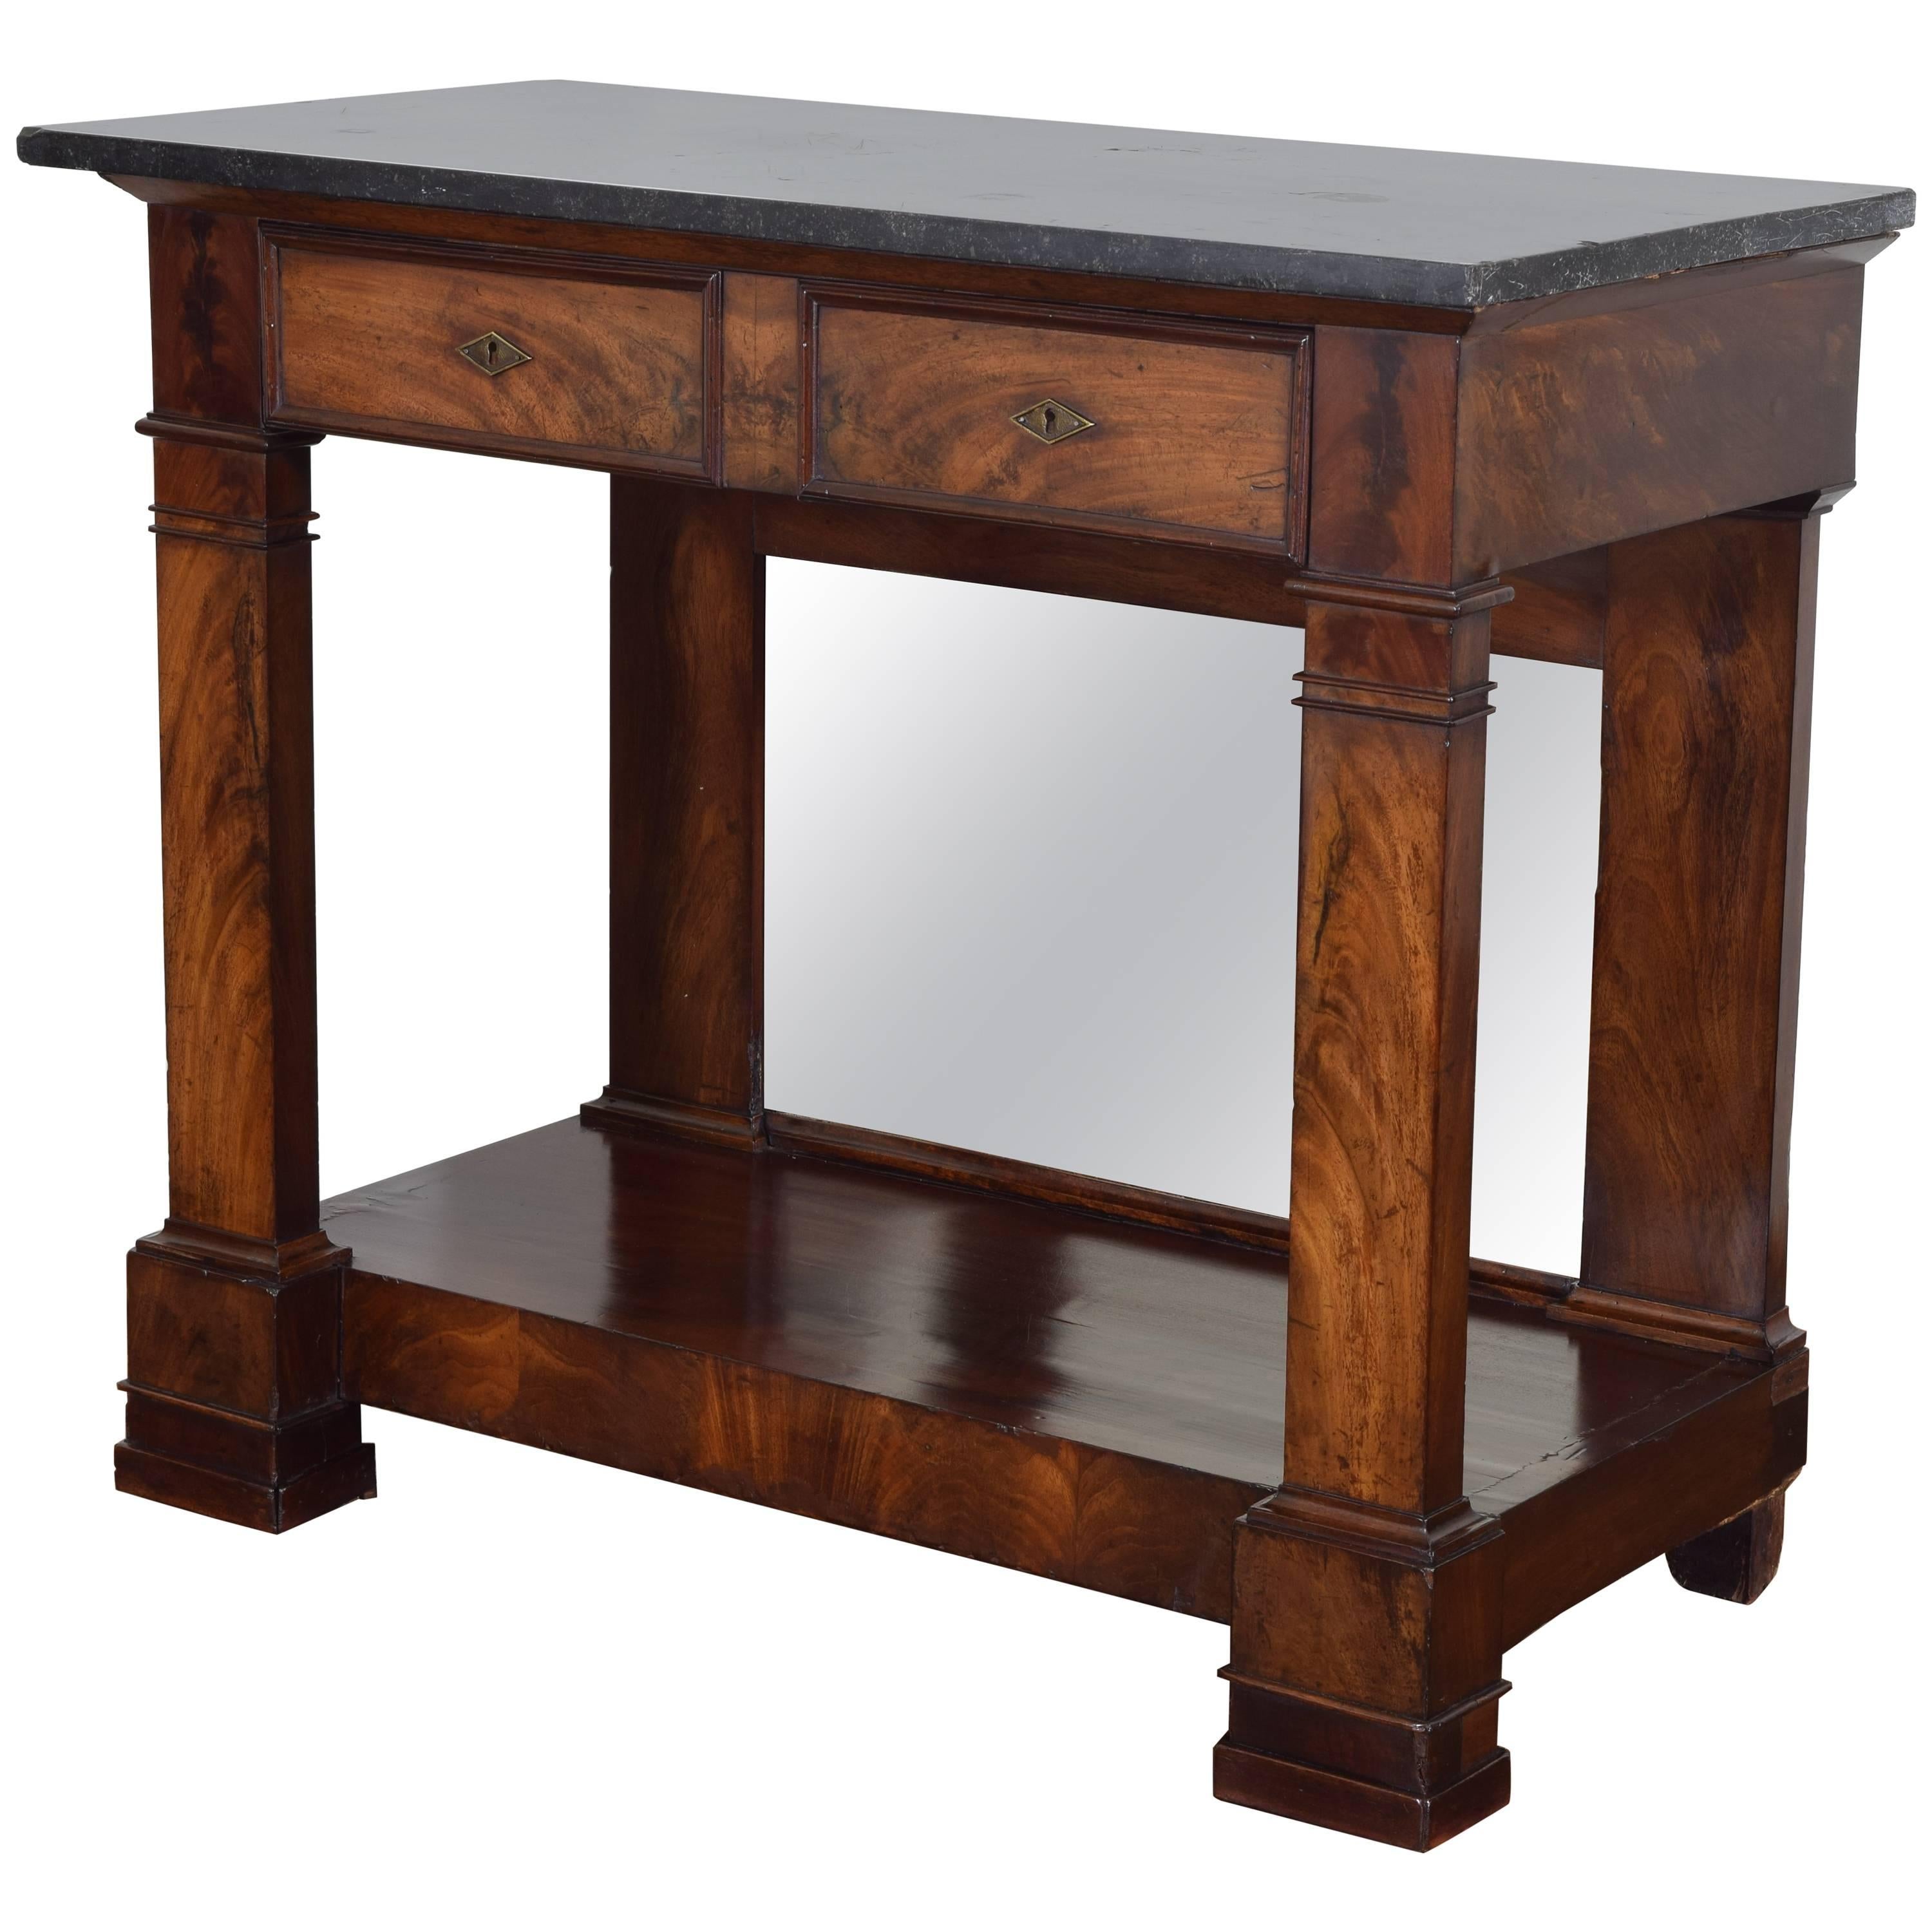 French Restauration Period Walnut and Marble-Top Console Table, 19th Century